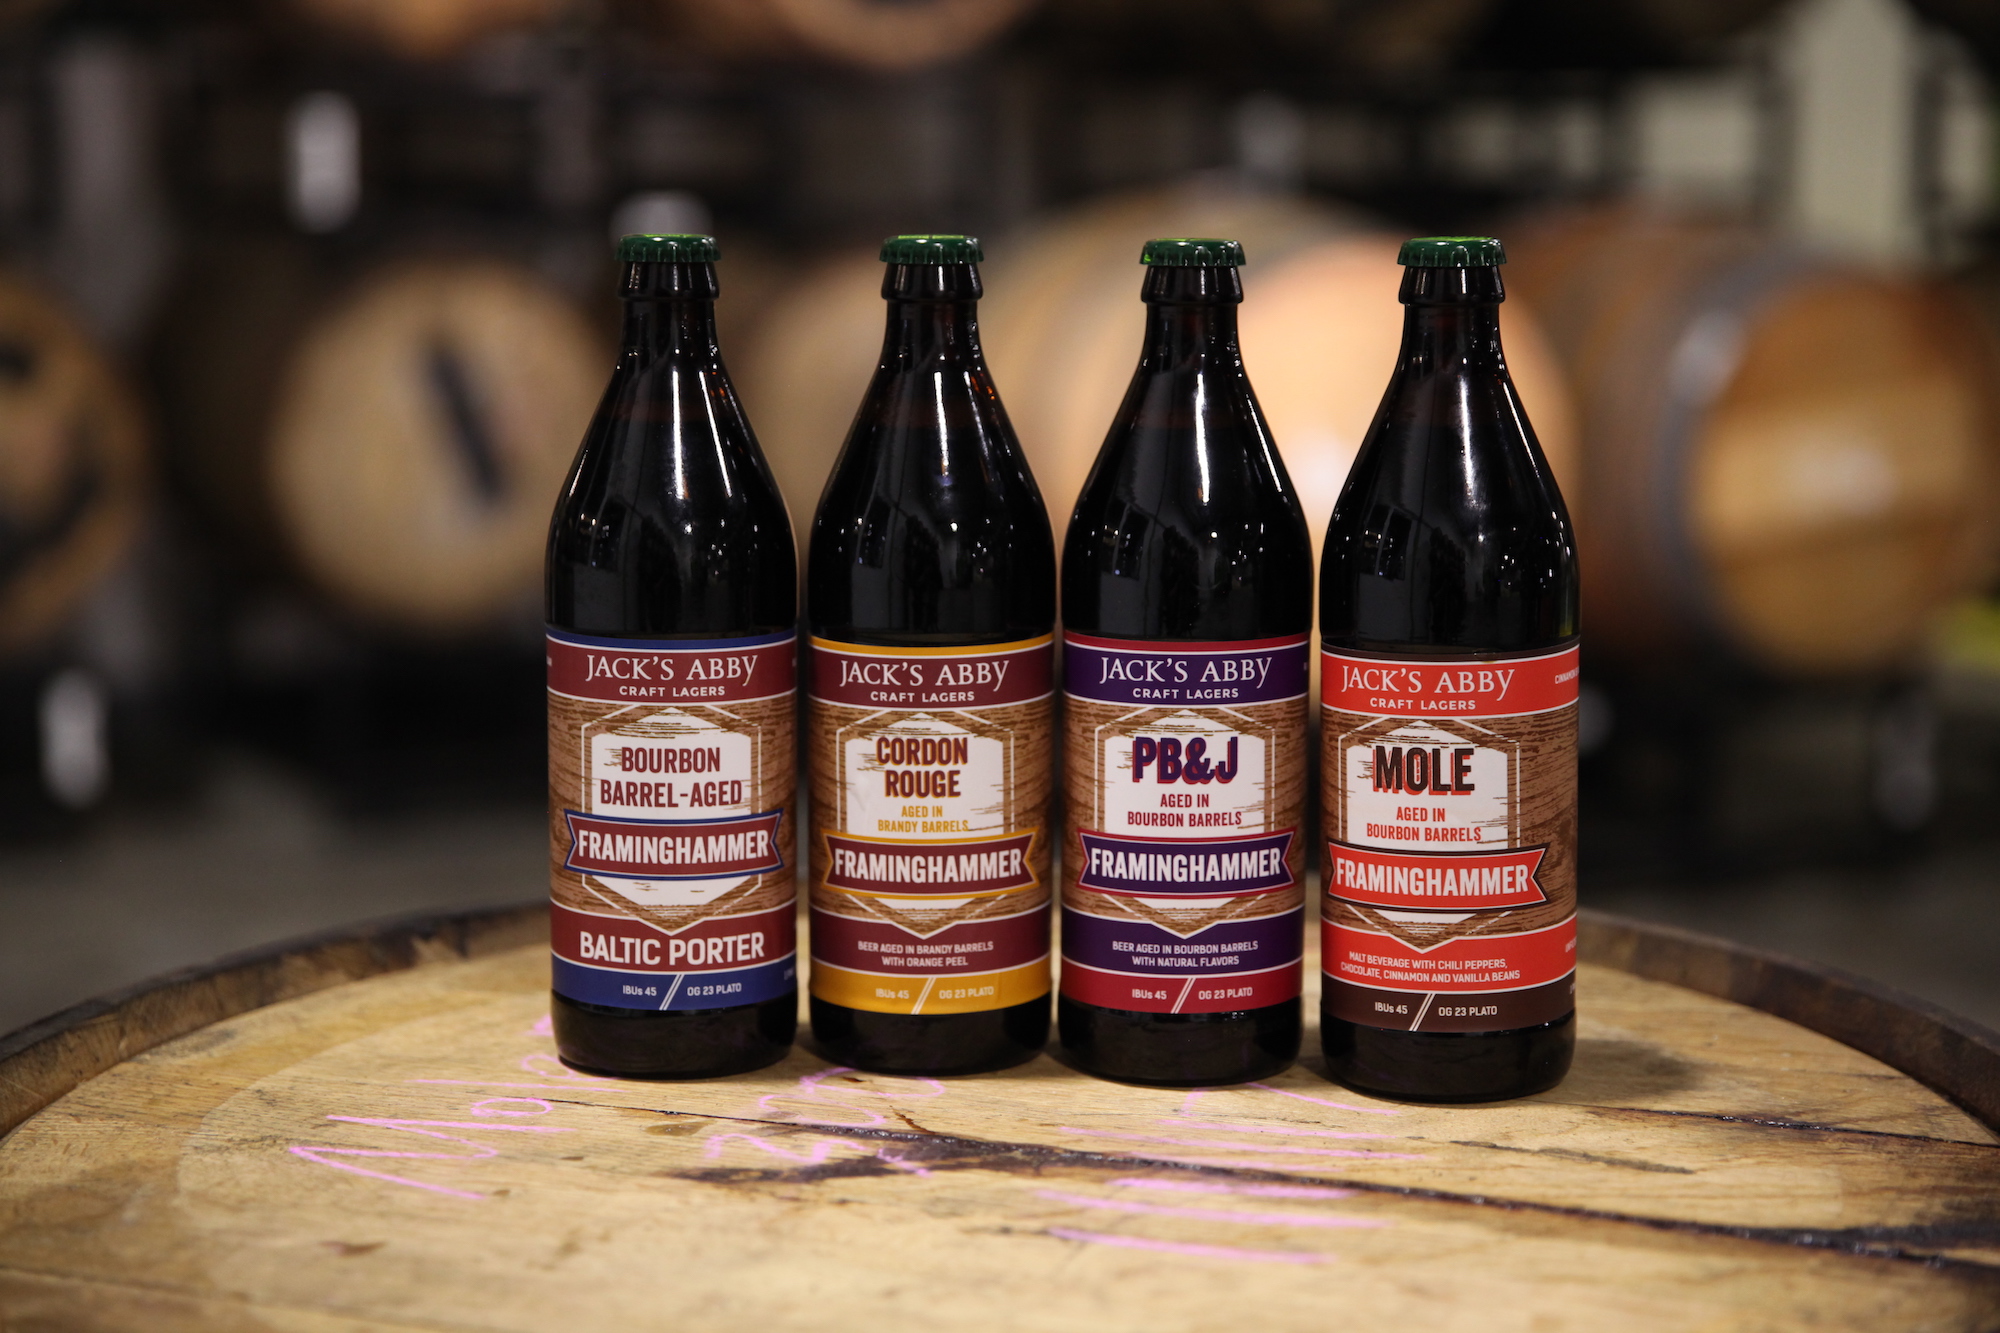 How One Mass. Brewery Puts Mom’s PB&J Into a Barrel-Aged Porter